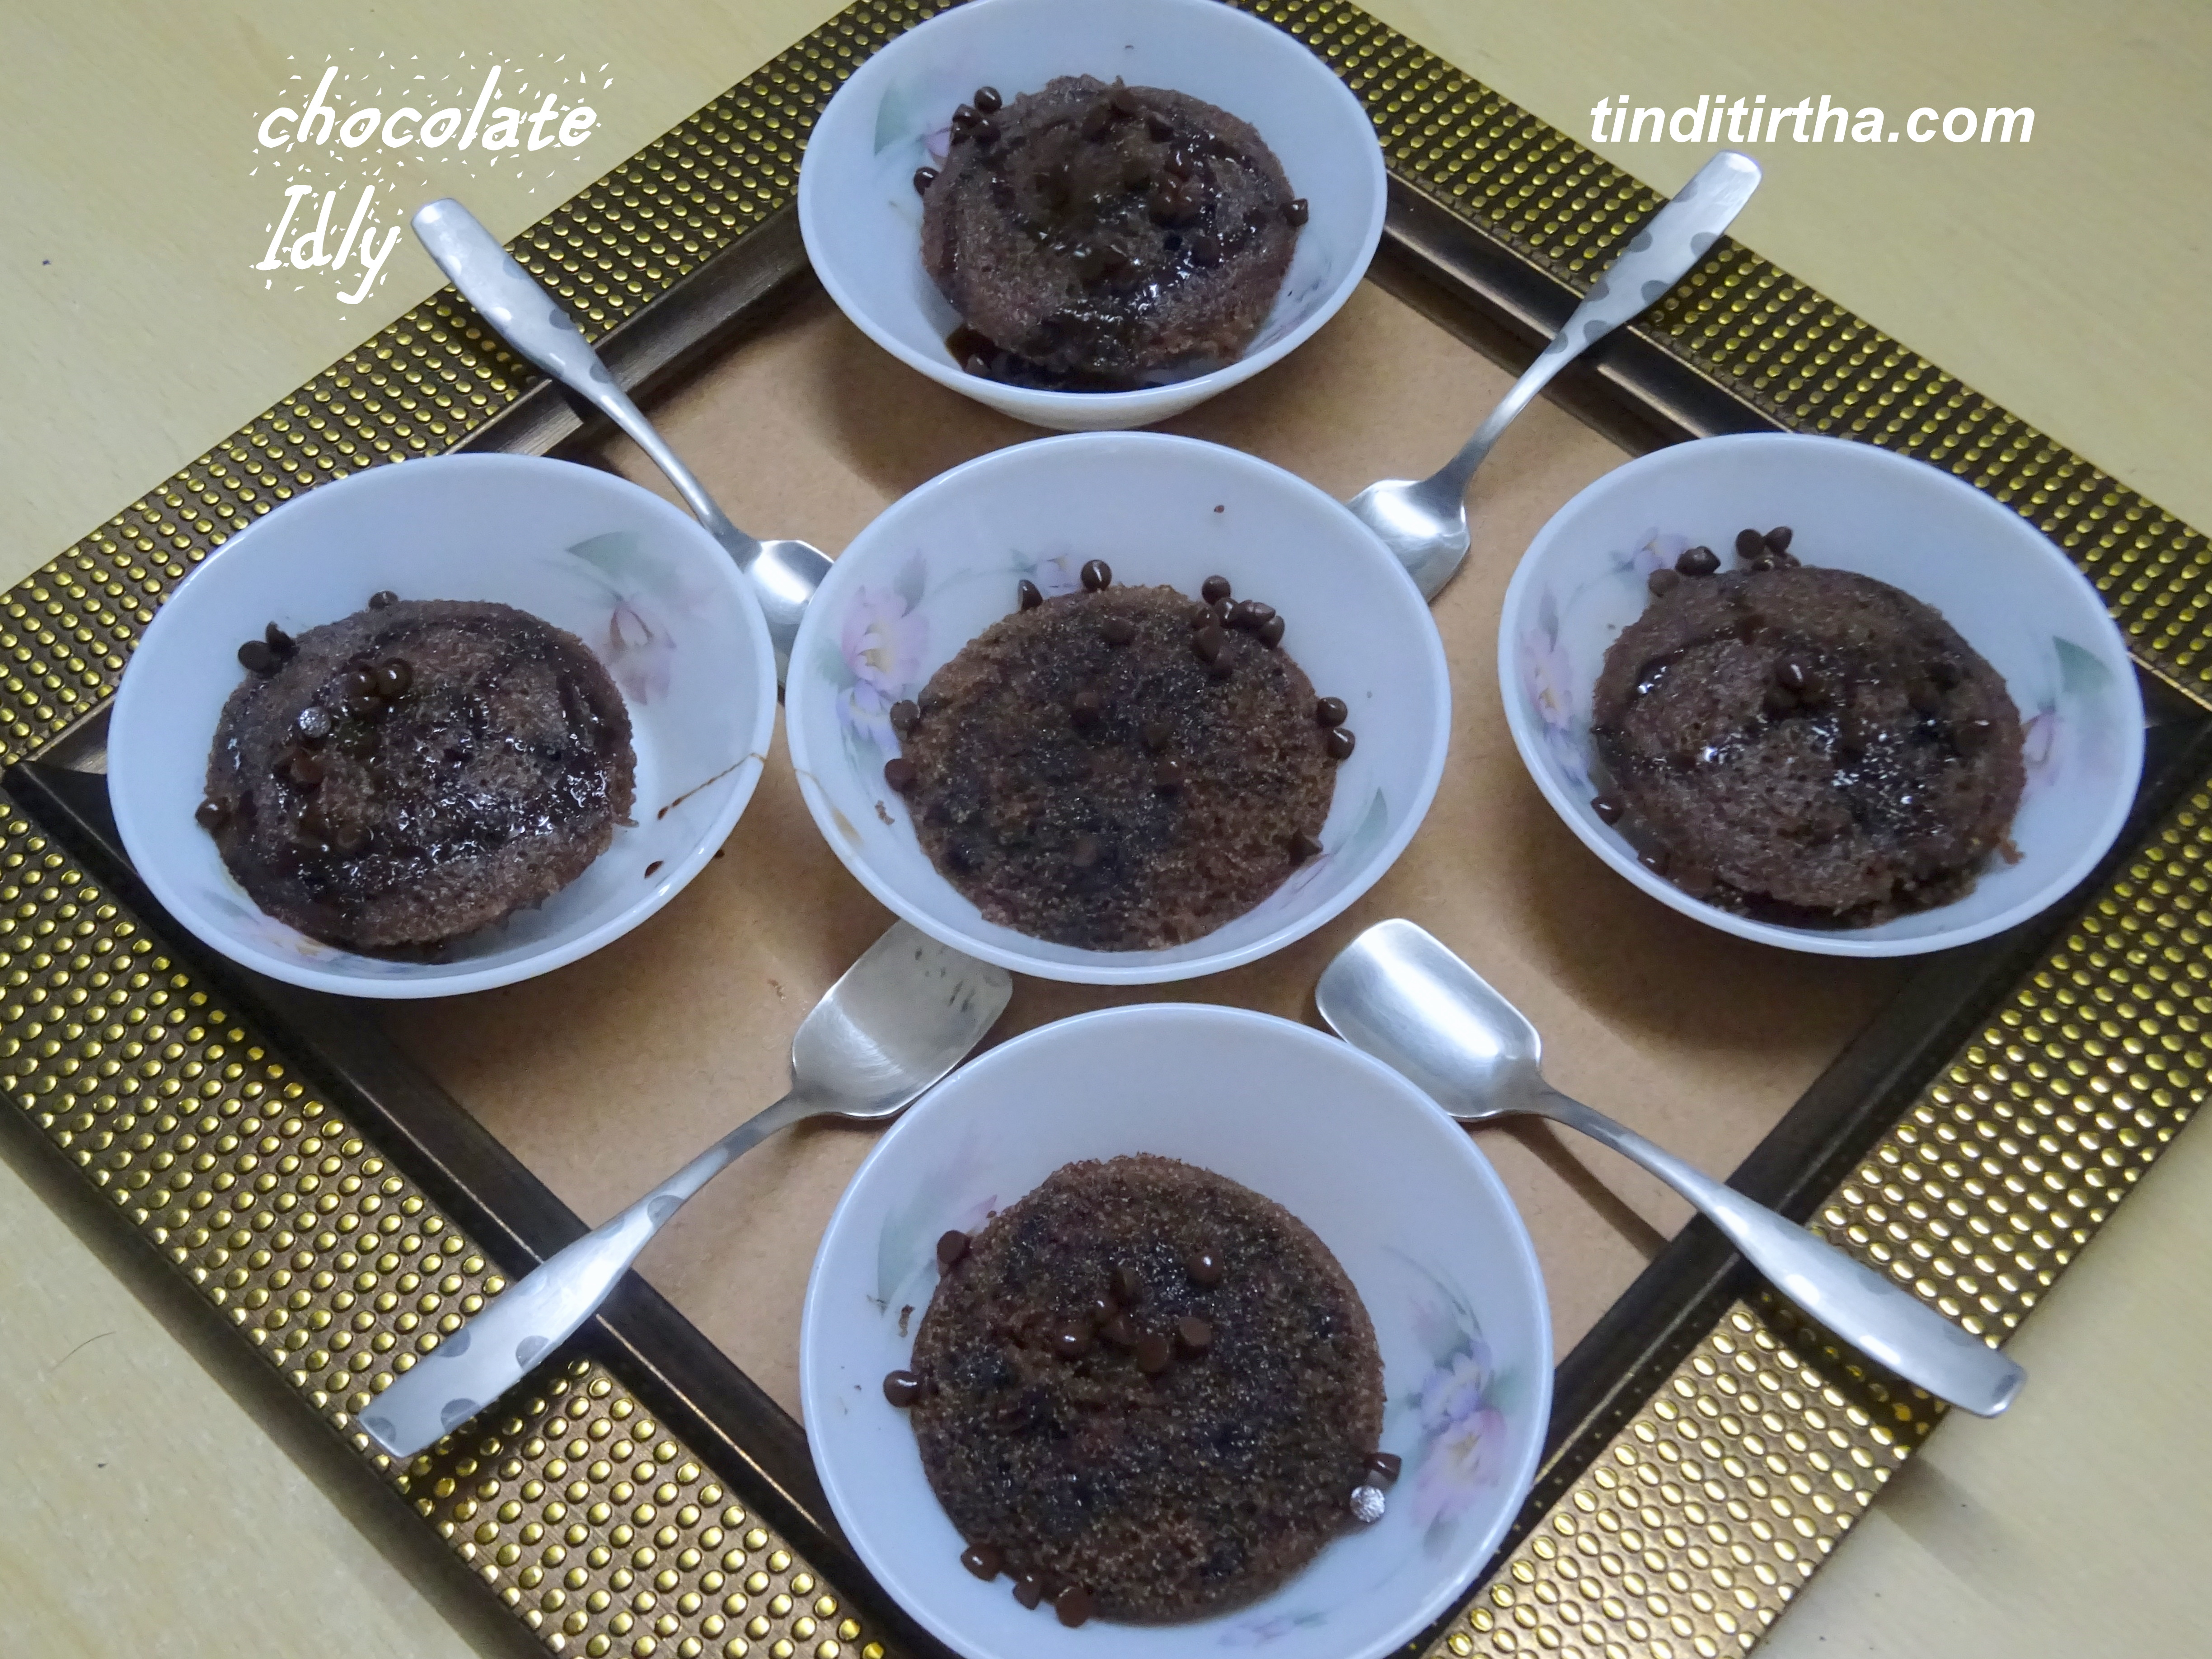 INSTANT CHOCOLATE IDLY….which can be prepared in minutes !